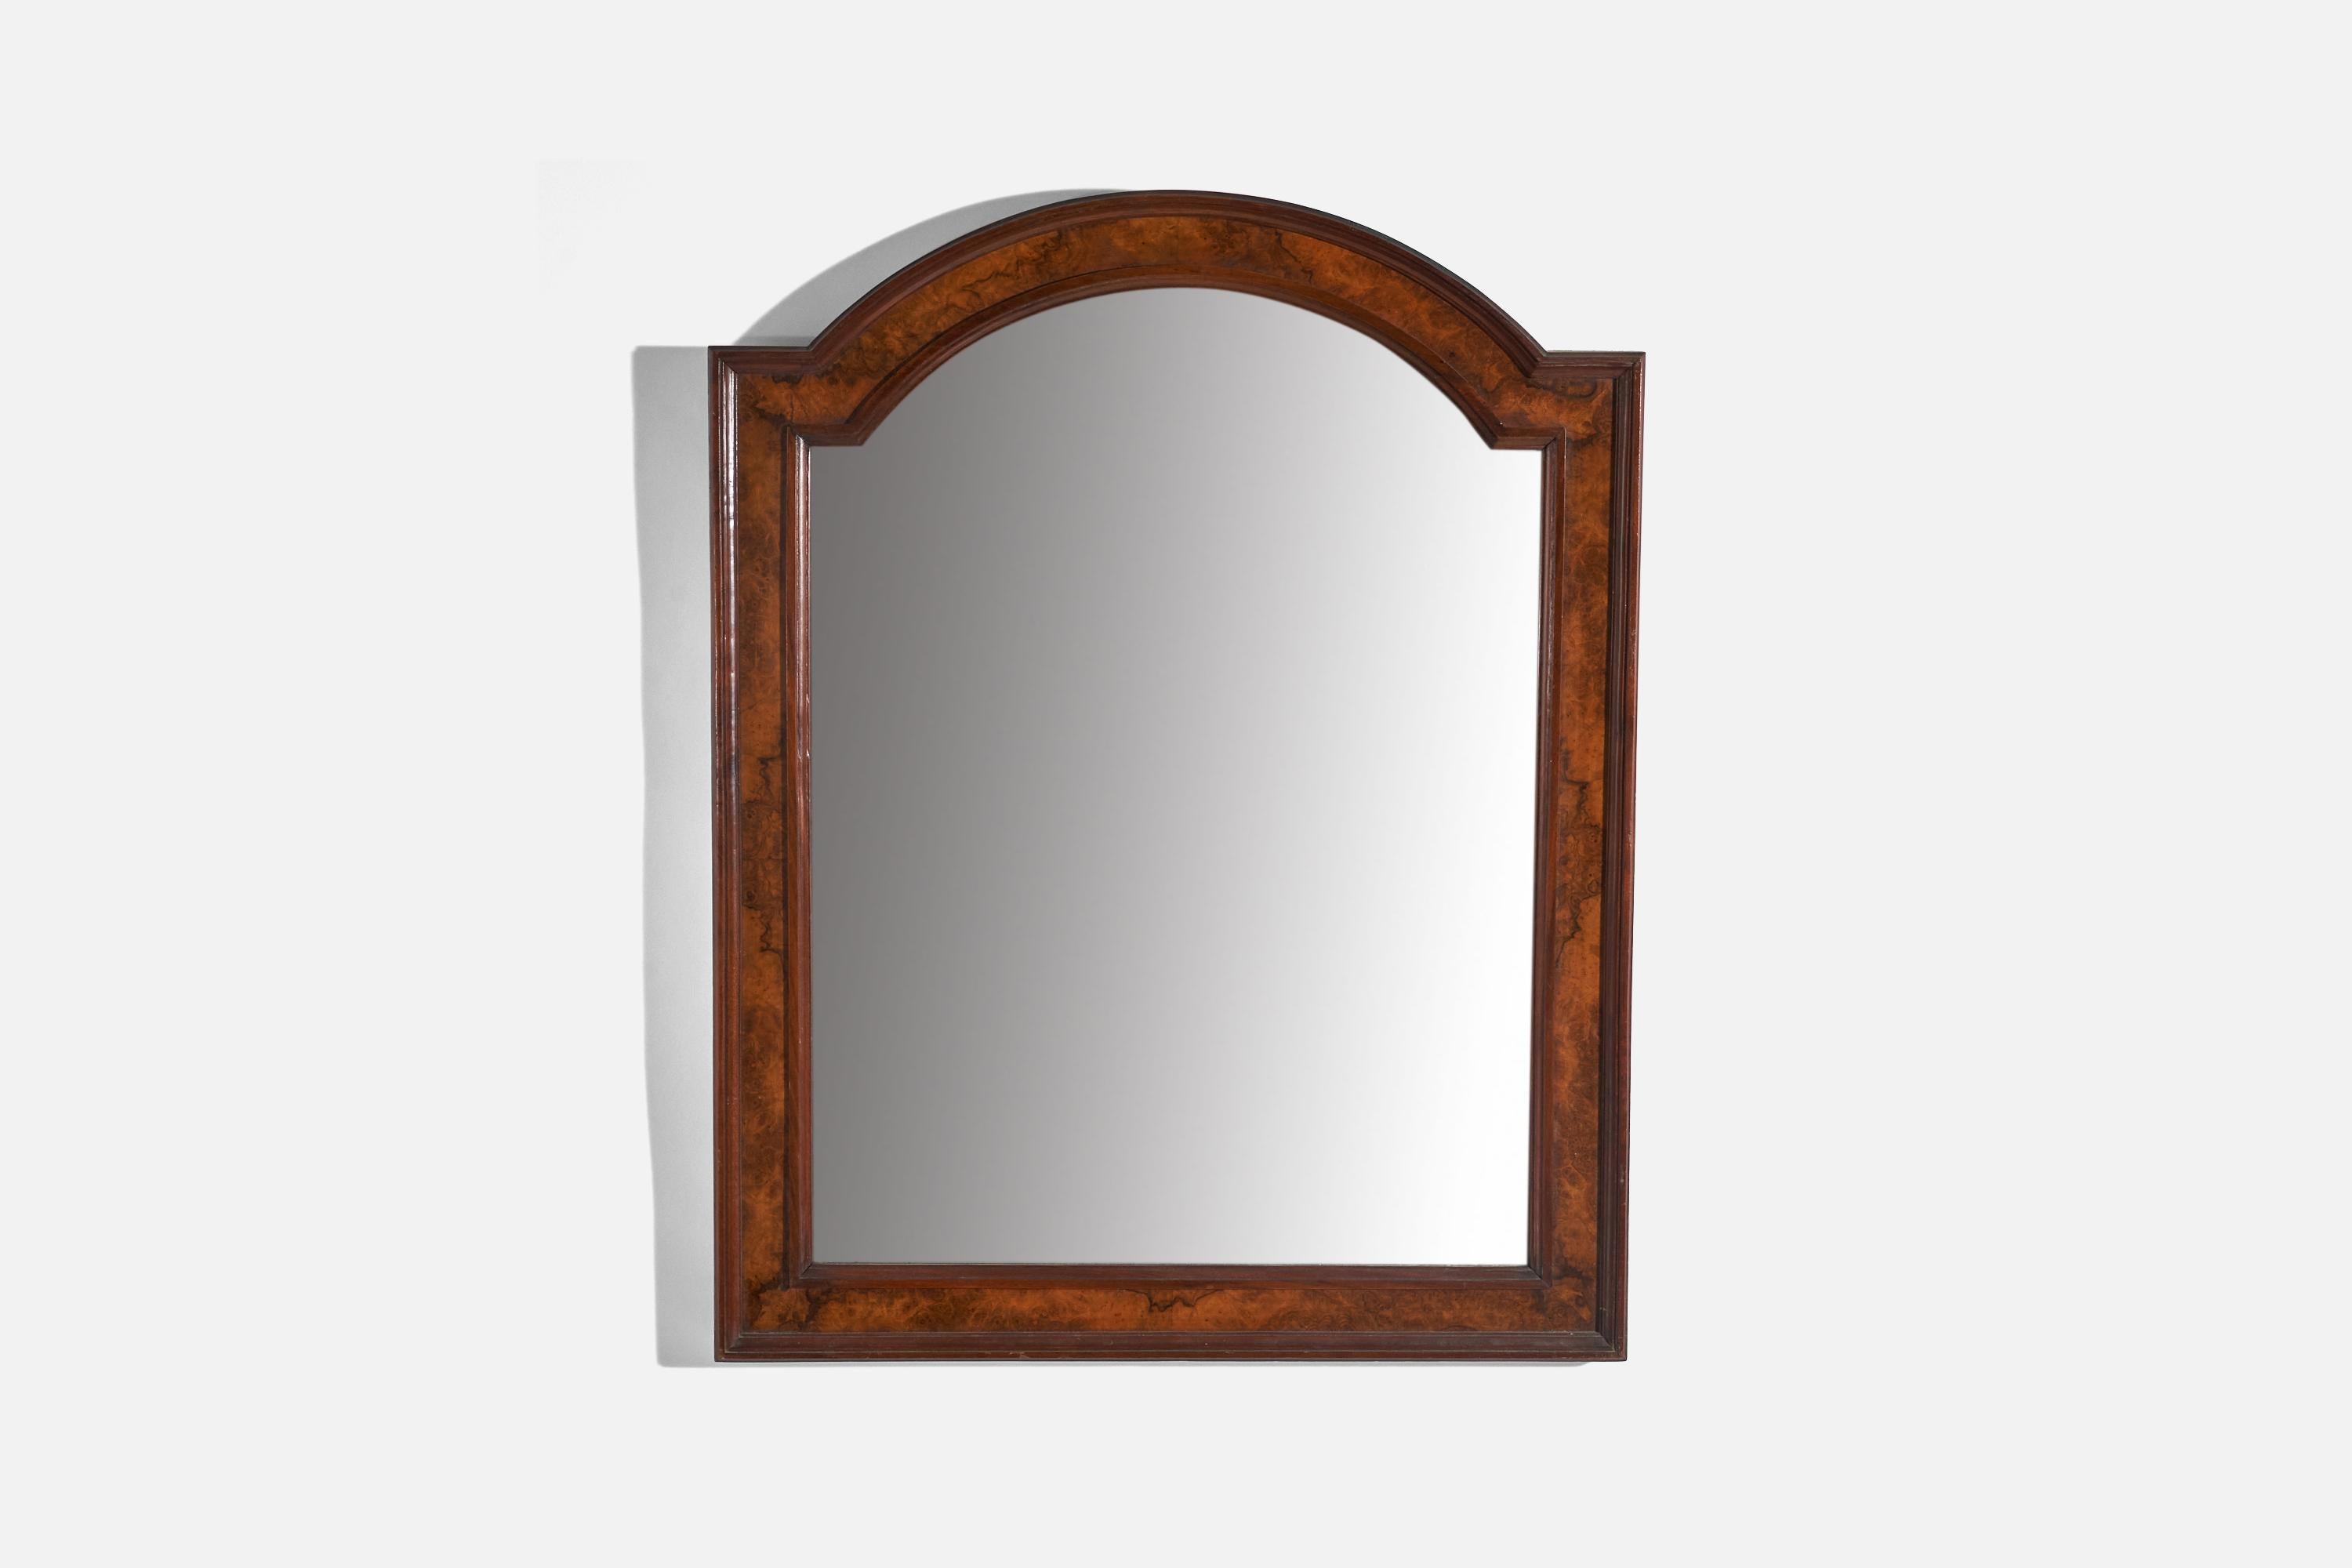 A wooden wall mirror designed and produced in Sweden, 1930s. 

